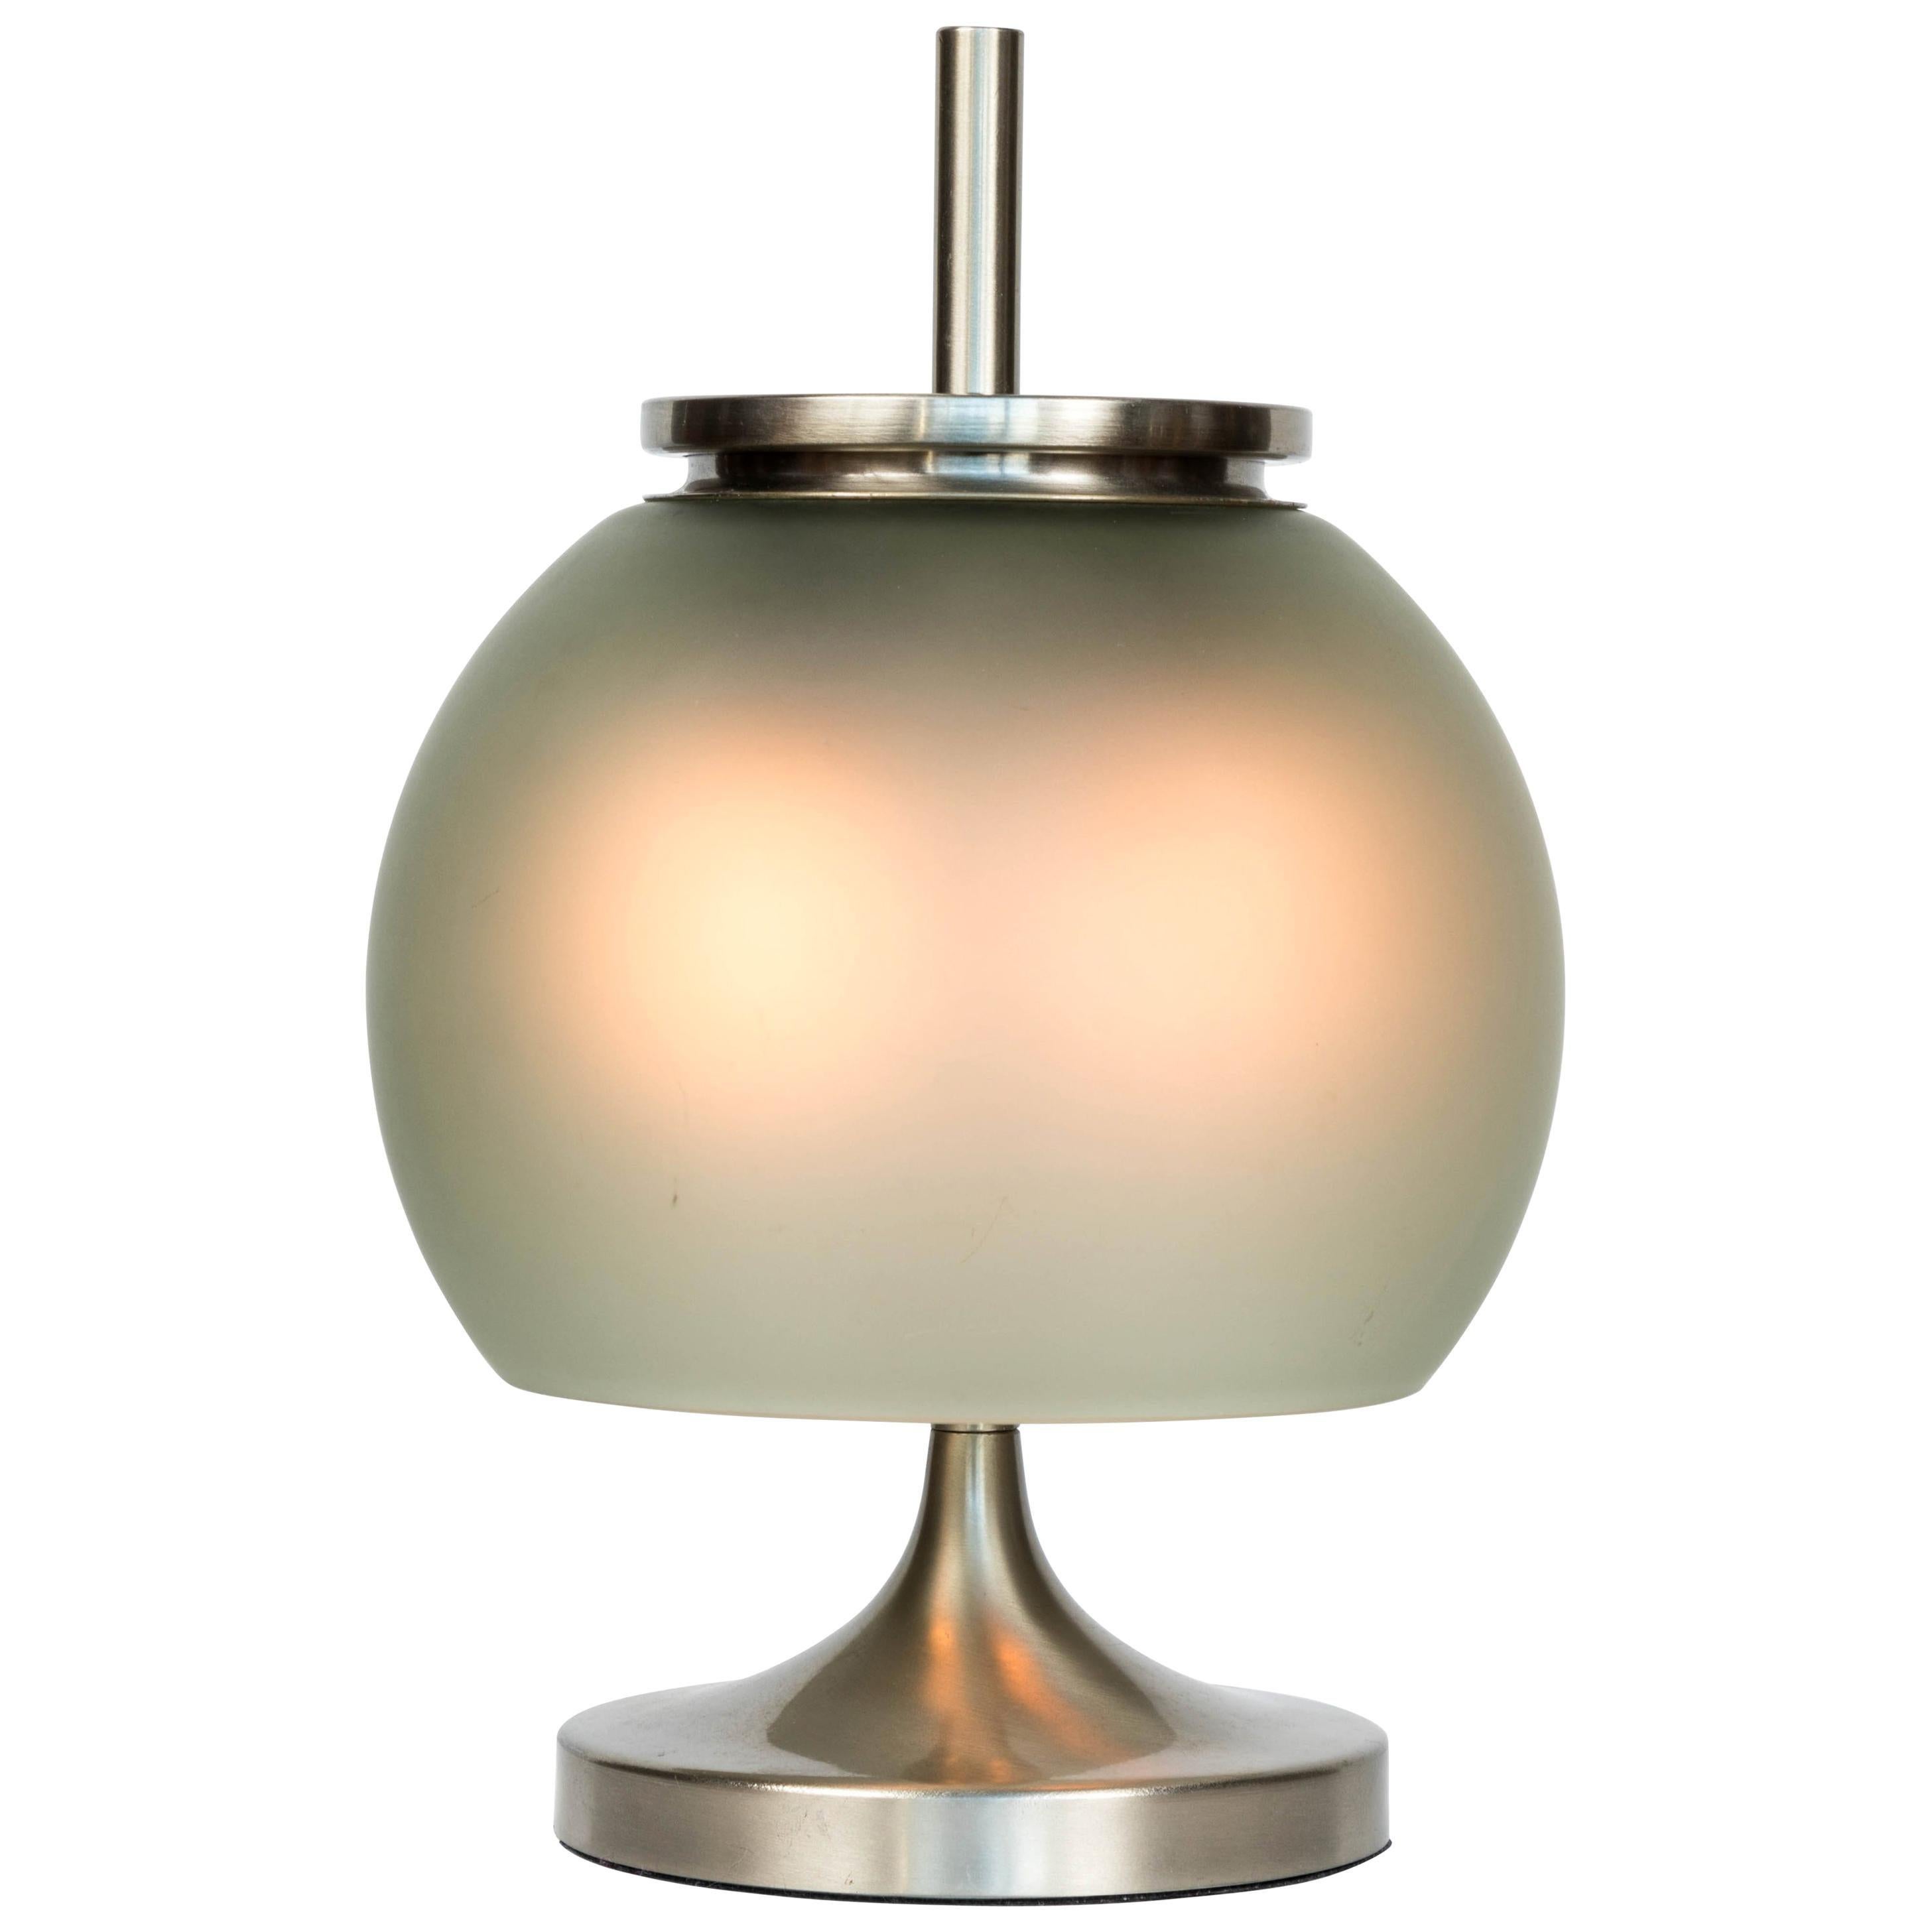 1962 Emma Gismondi Schweinberger 'Chi' table lamp for Artemide. This uniquely elegant table lamp is produced in nickeled brass and hand blown green opaline glass. An highly refined and iconic midcentury design that is quintessentially Italian. Two